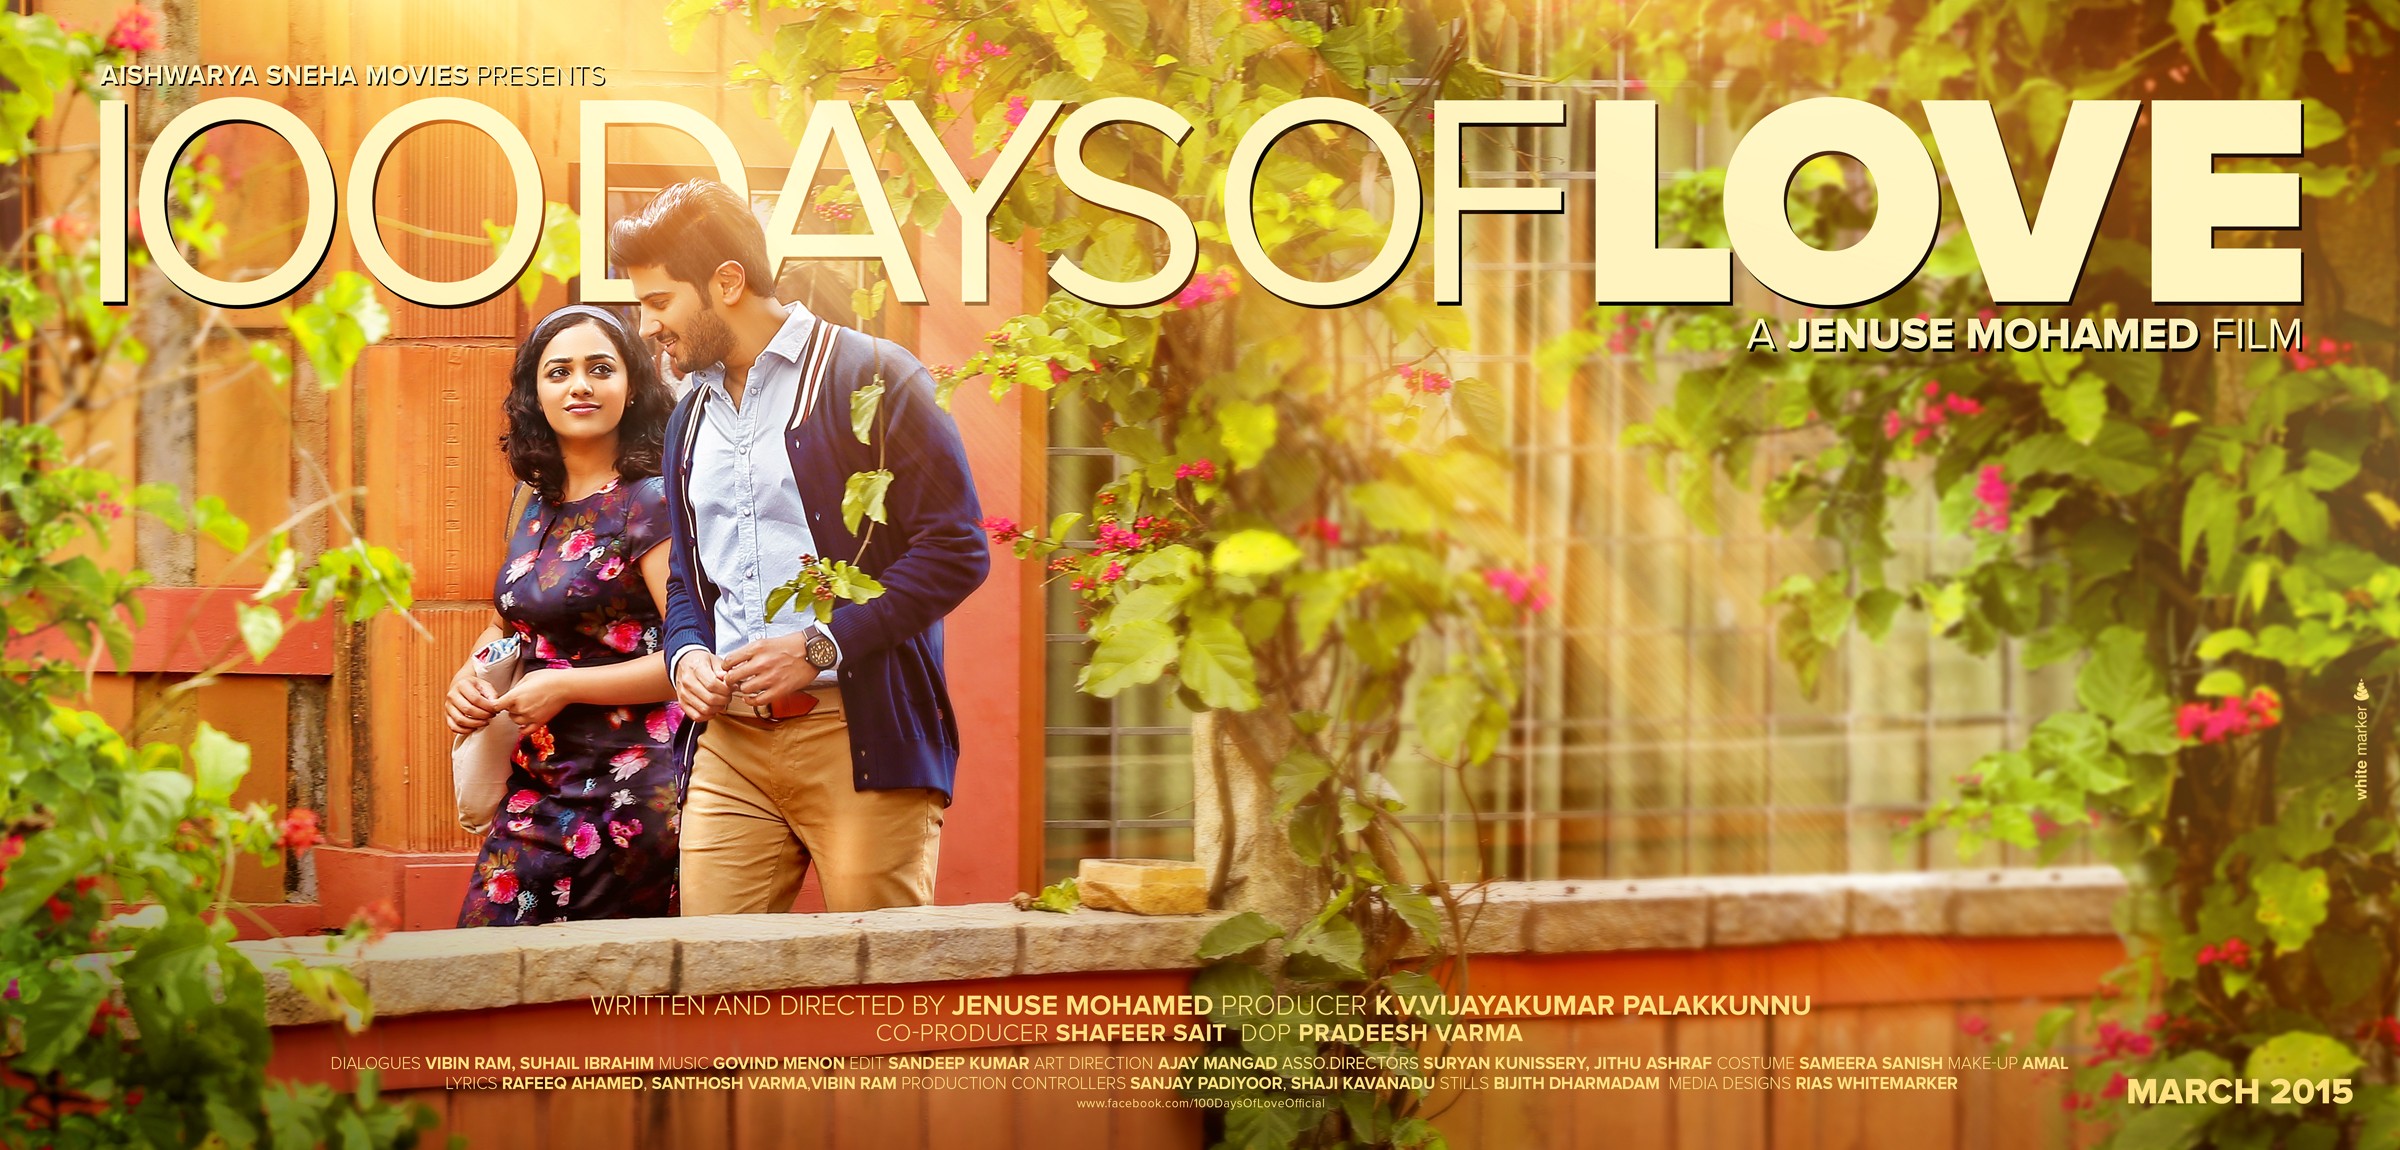 Mega Sized Movie Poster Image for 100 Days of Love (#5 of 8)